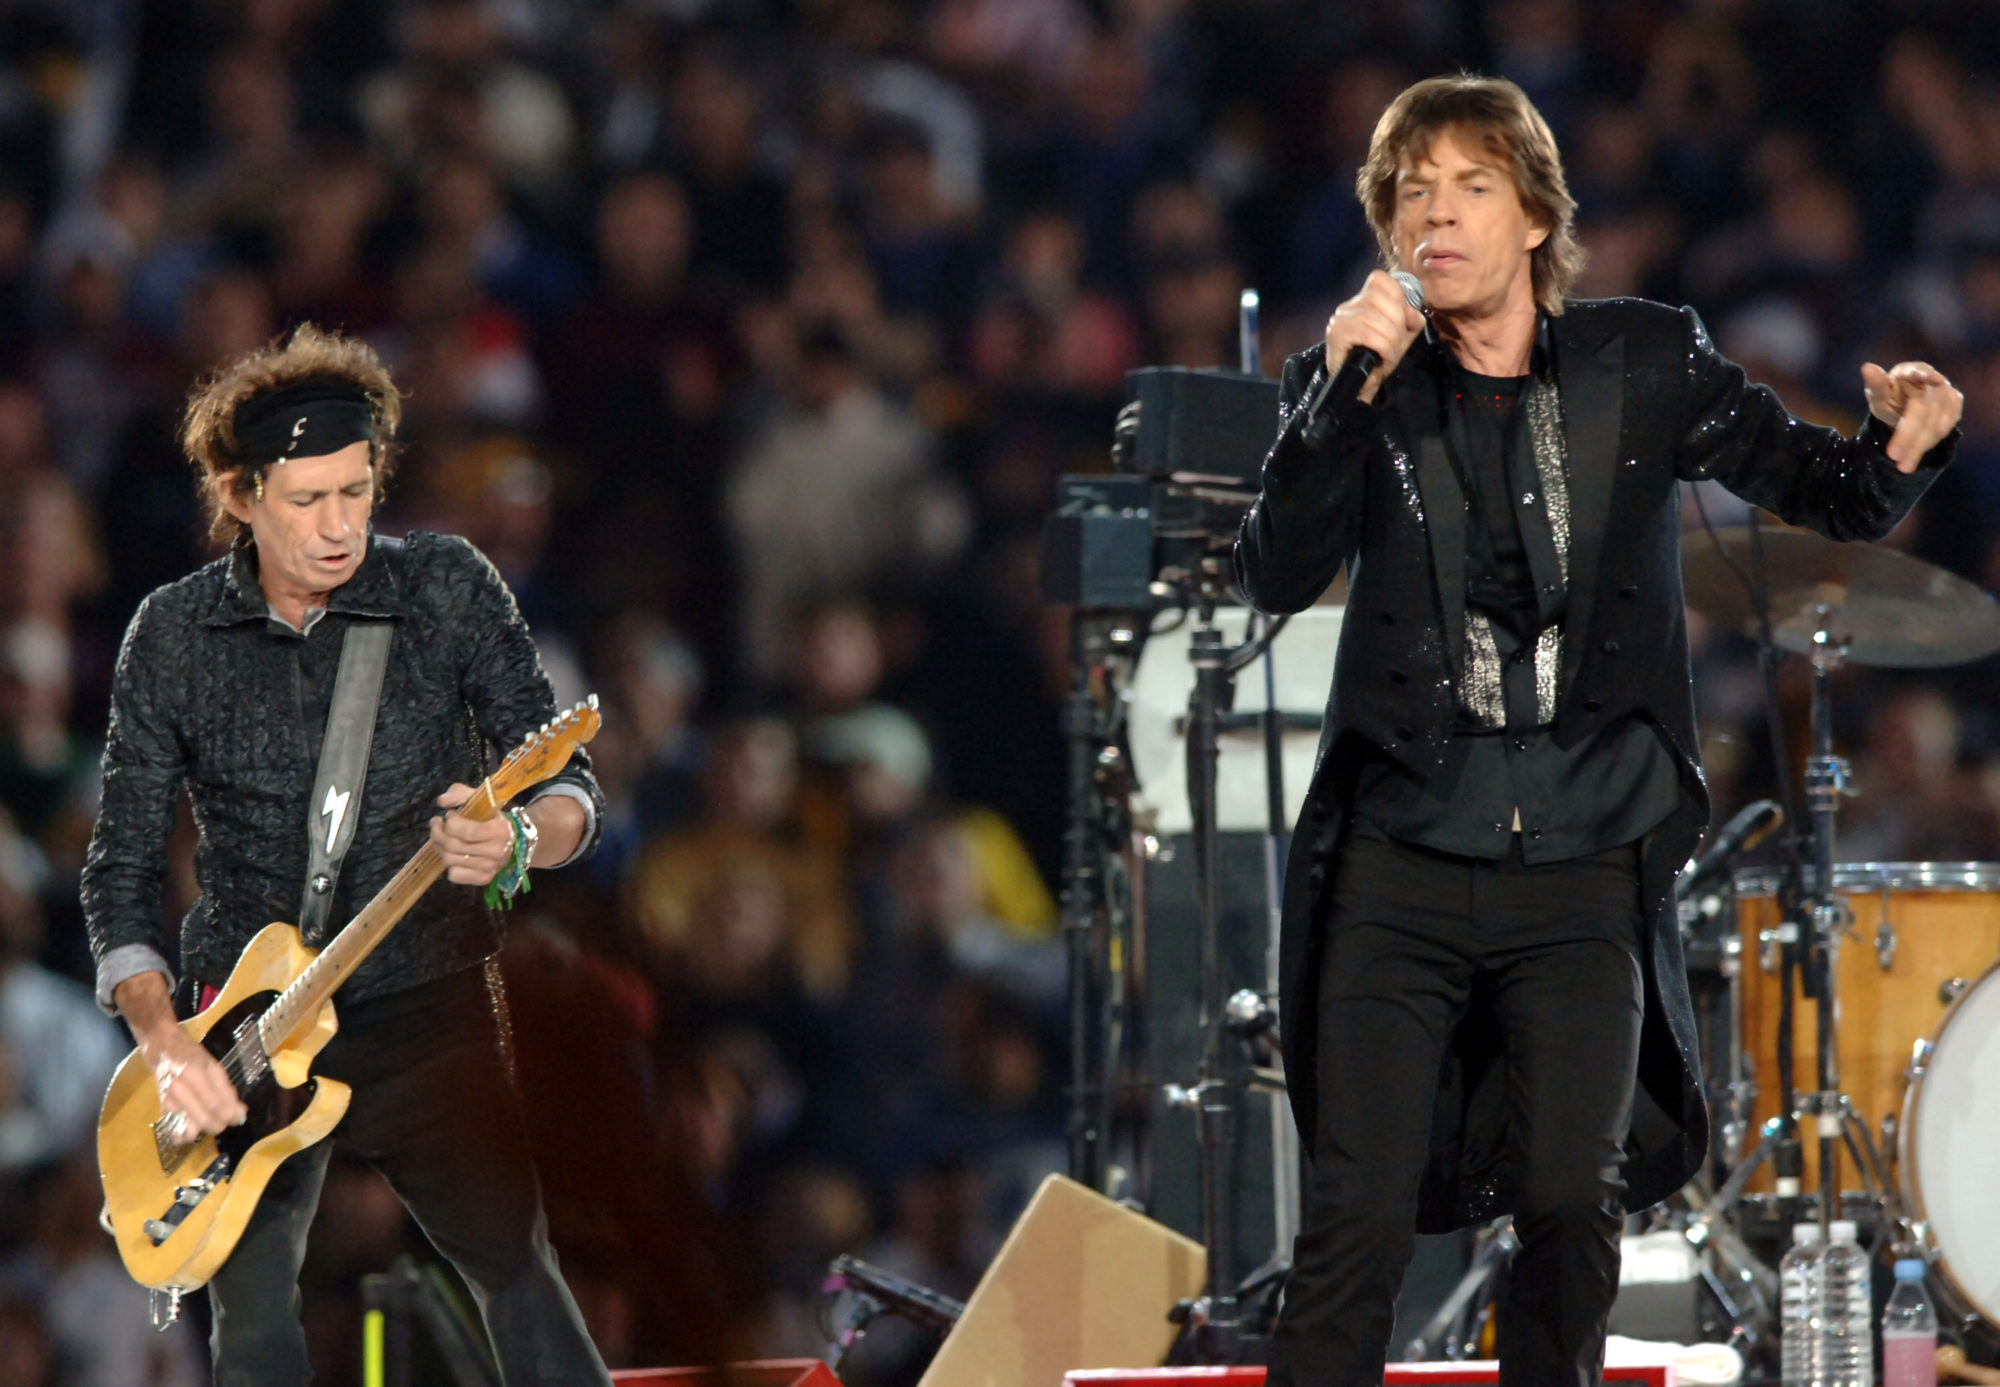 The Rolling Stones Perform at the Super Bowl in 2006